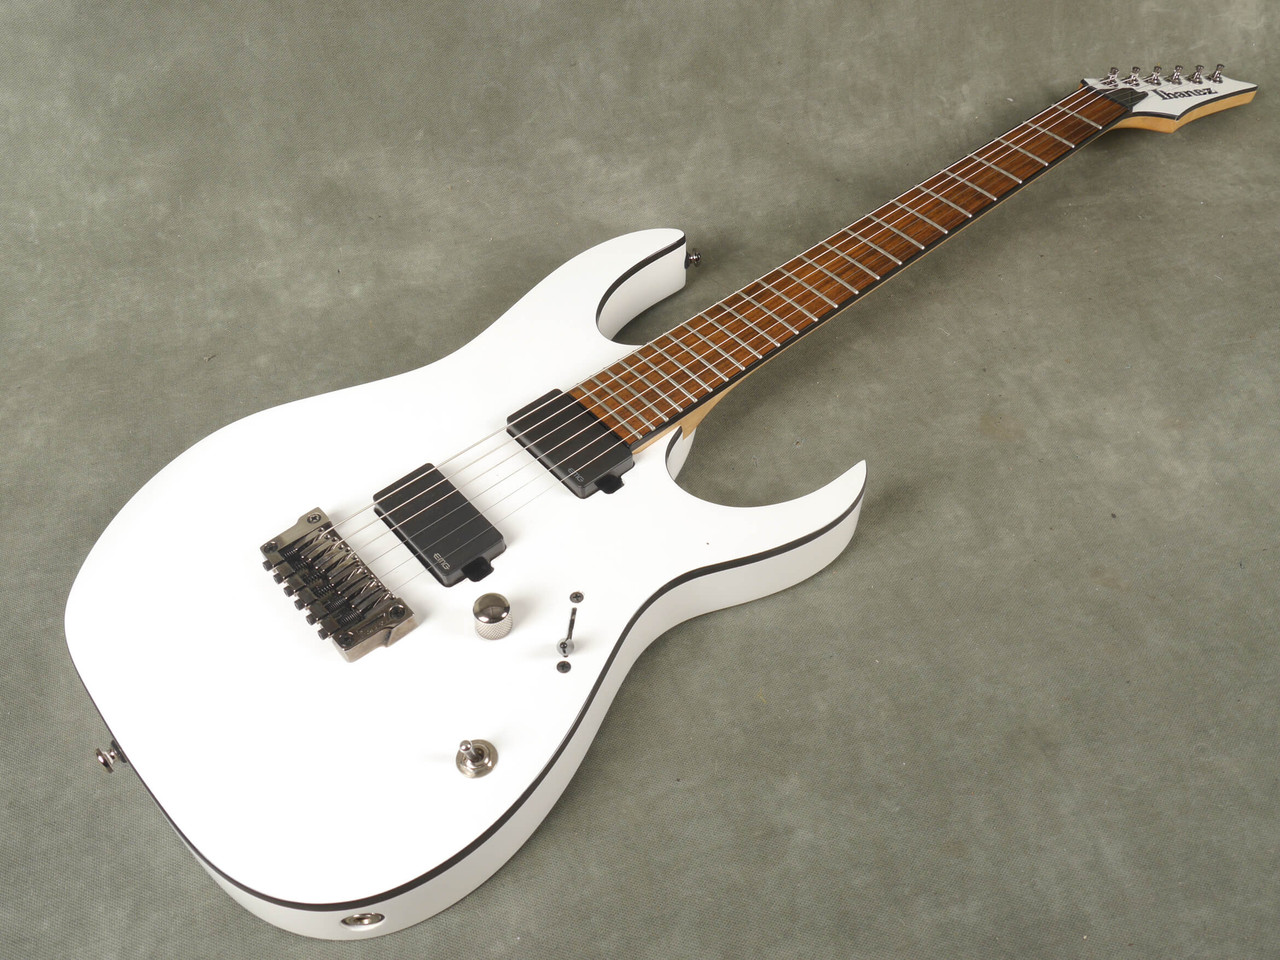 Ibanez RGIR 20FE Electric Guitar - White - 2nd Hand